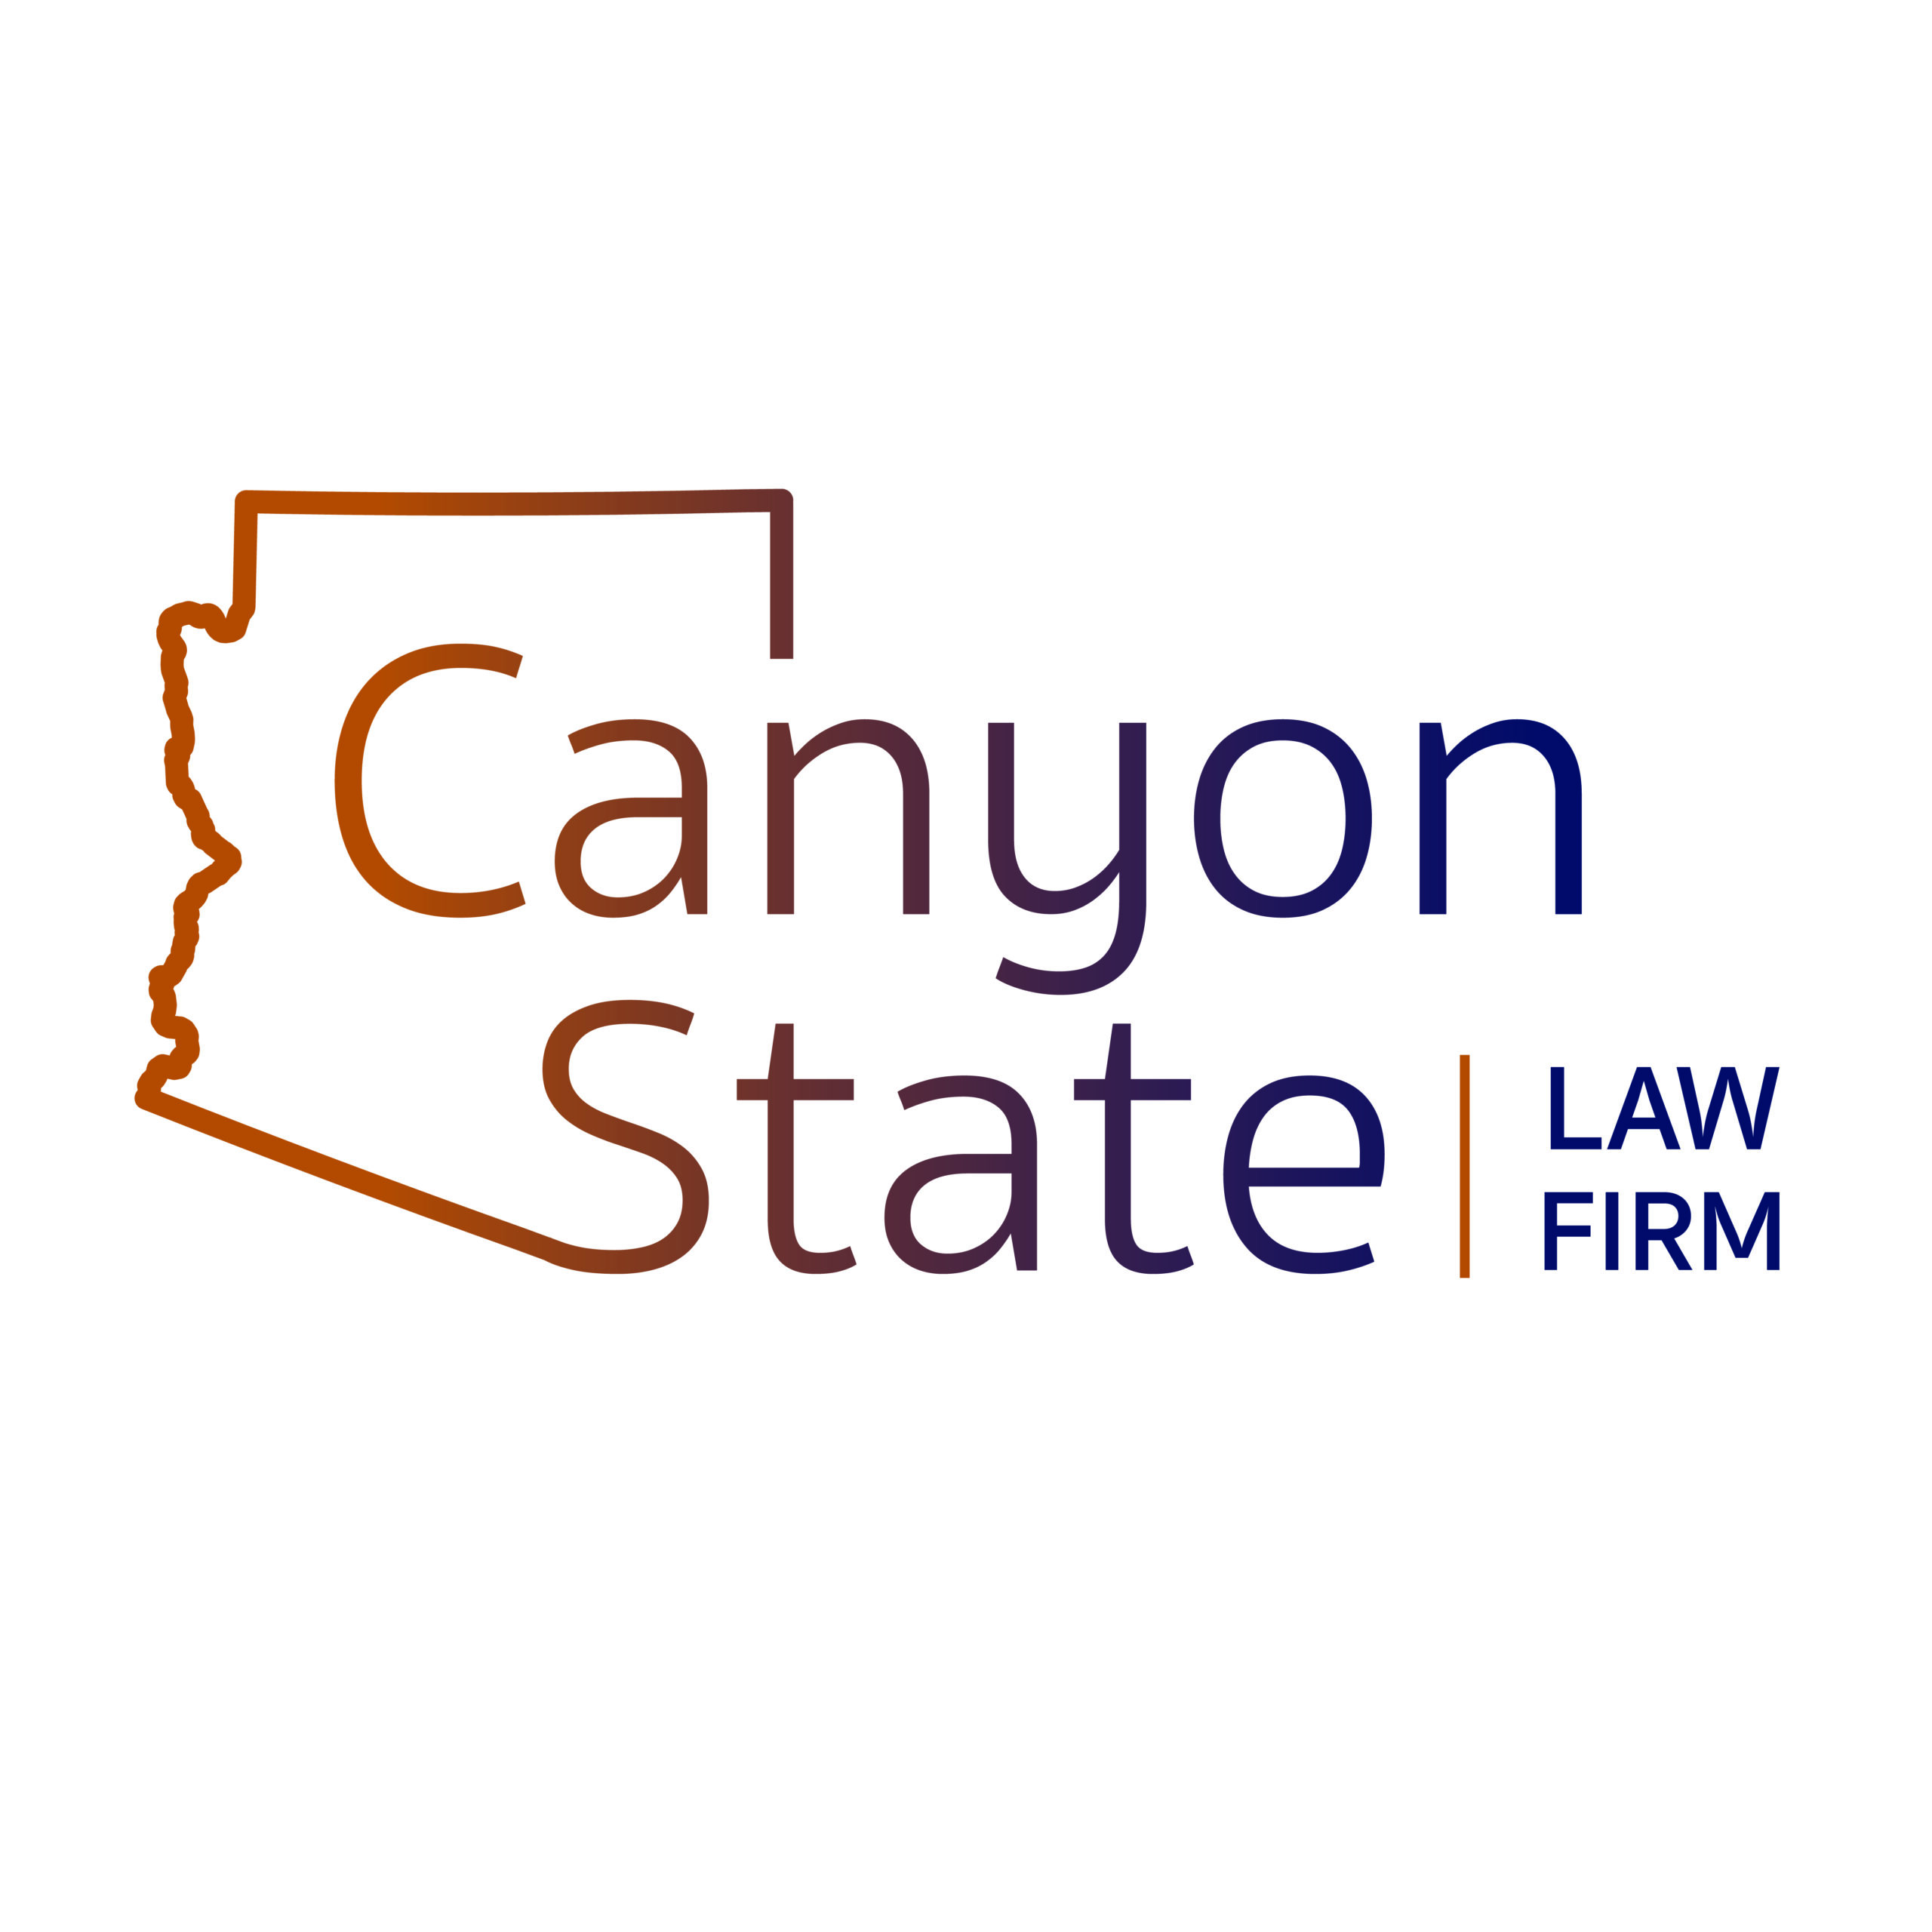 Canyon-State-Law-Firm-logo-GRADIENT-scaled-1.jpg